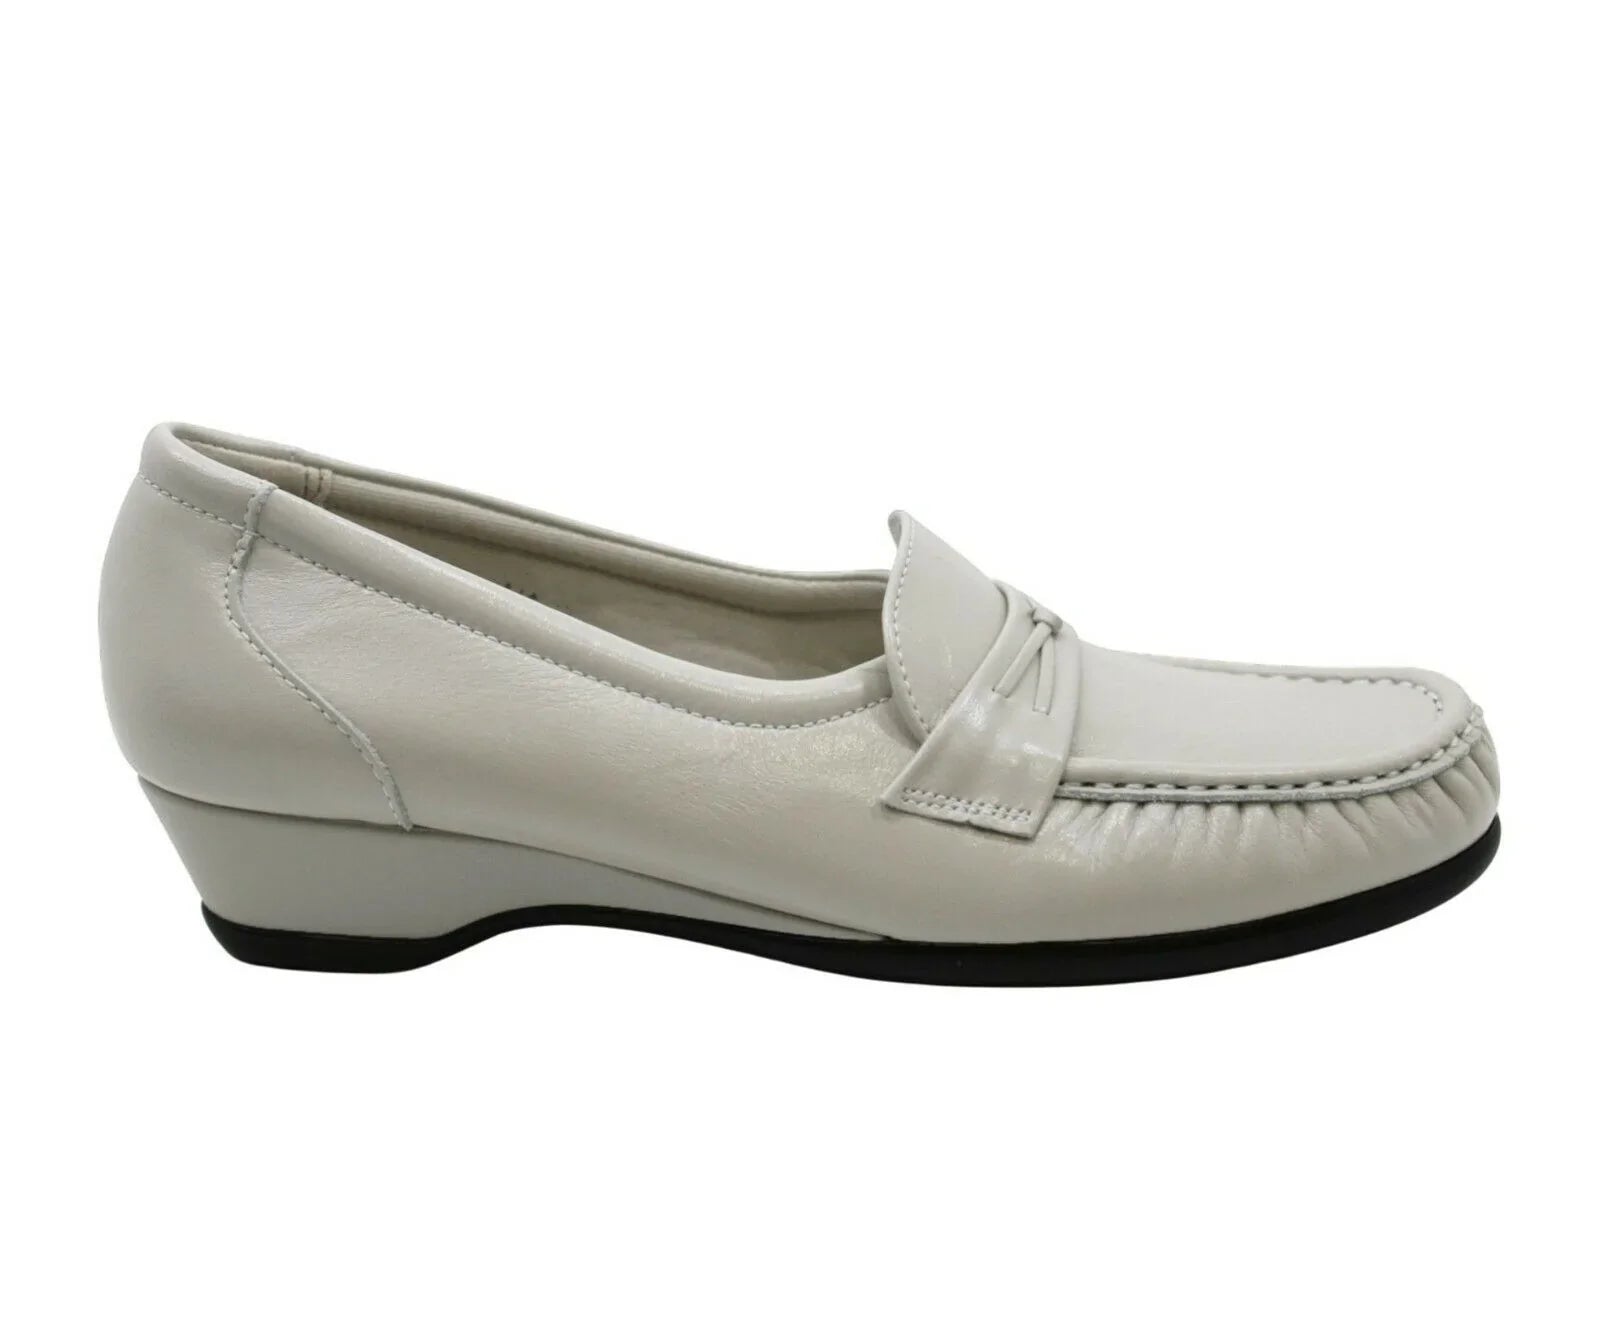 SAS Easier Womens Bone Leather Wedge Loafers Comfort Shoes US 11.5 Narrow - SVNYFancy